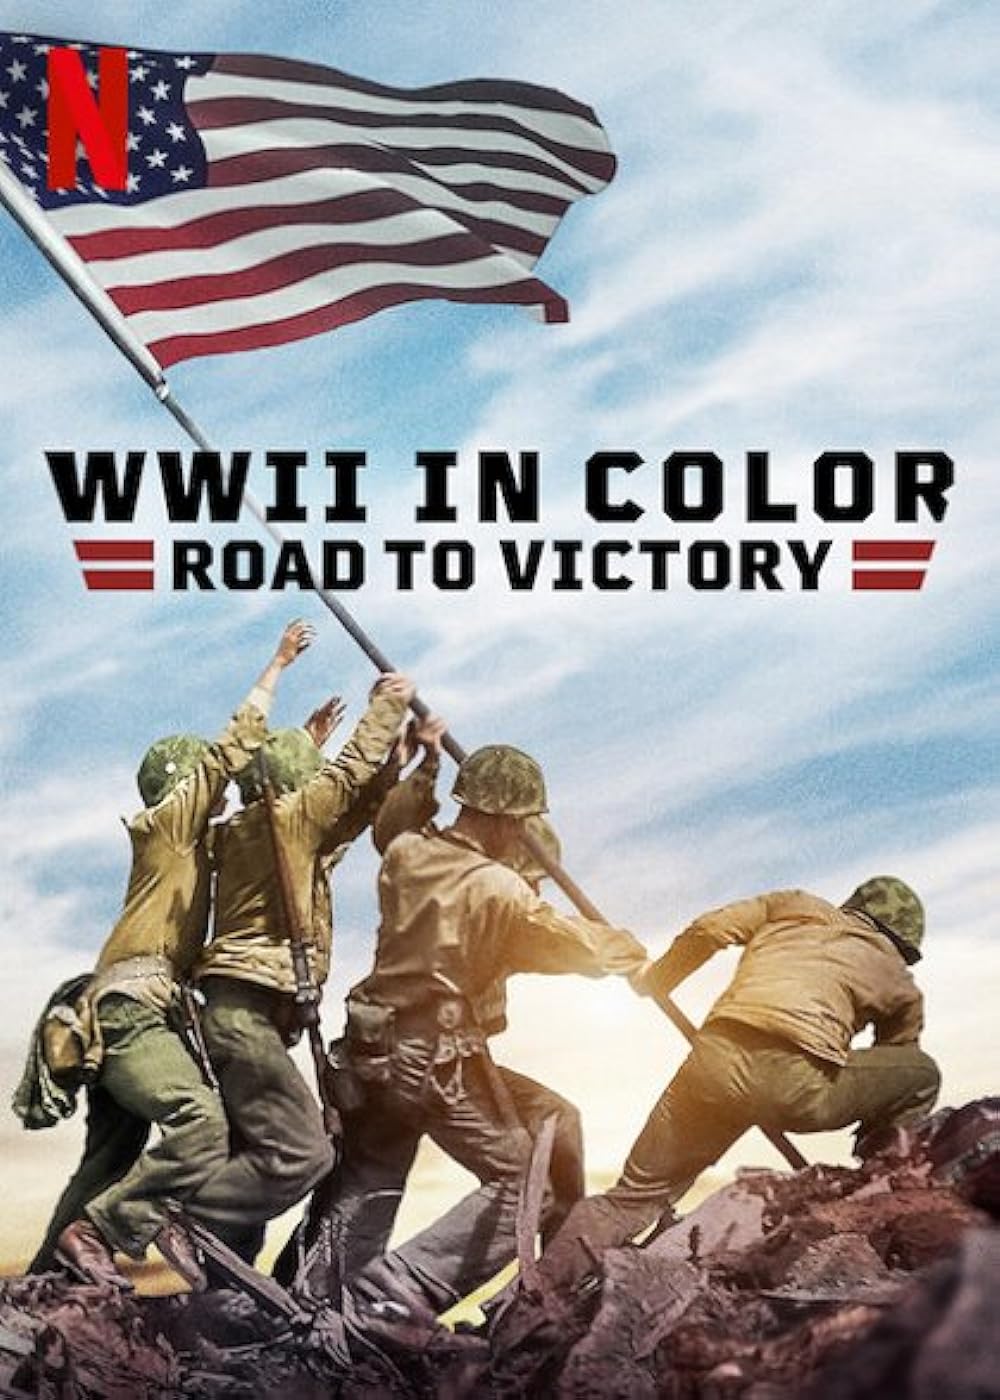 WWII in Color: Road to Victory (2021) S1 EP7 The Battle of the Philippine Sea 128Kbps 25Fps 48Khz 2.0Ch DD+ NF E-AC3 Turkish Audio TAC[